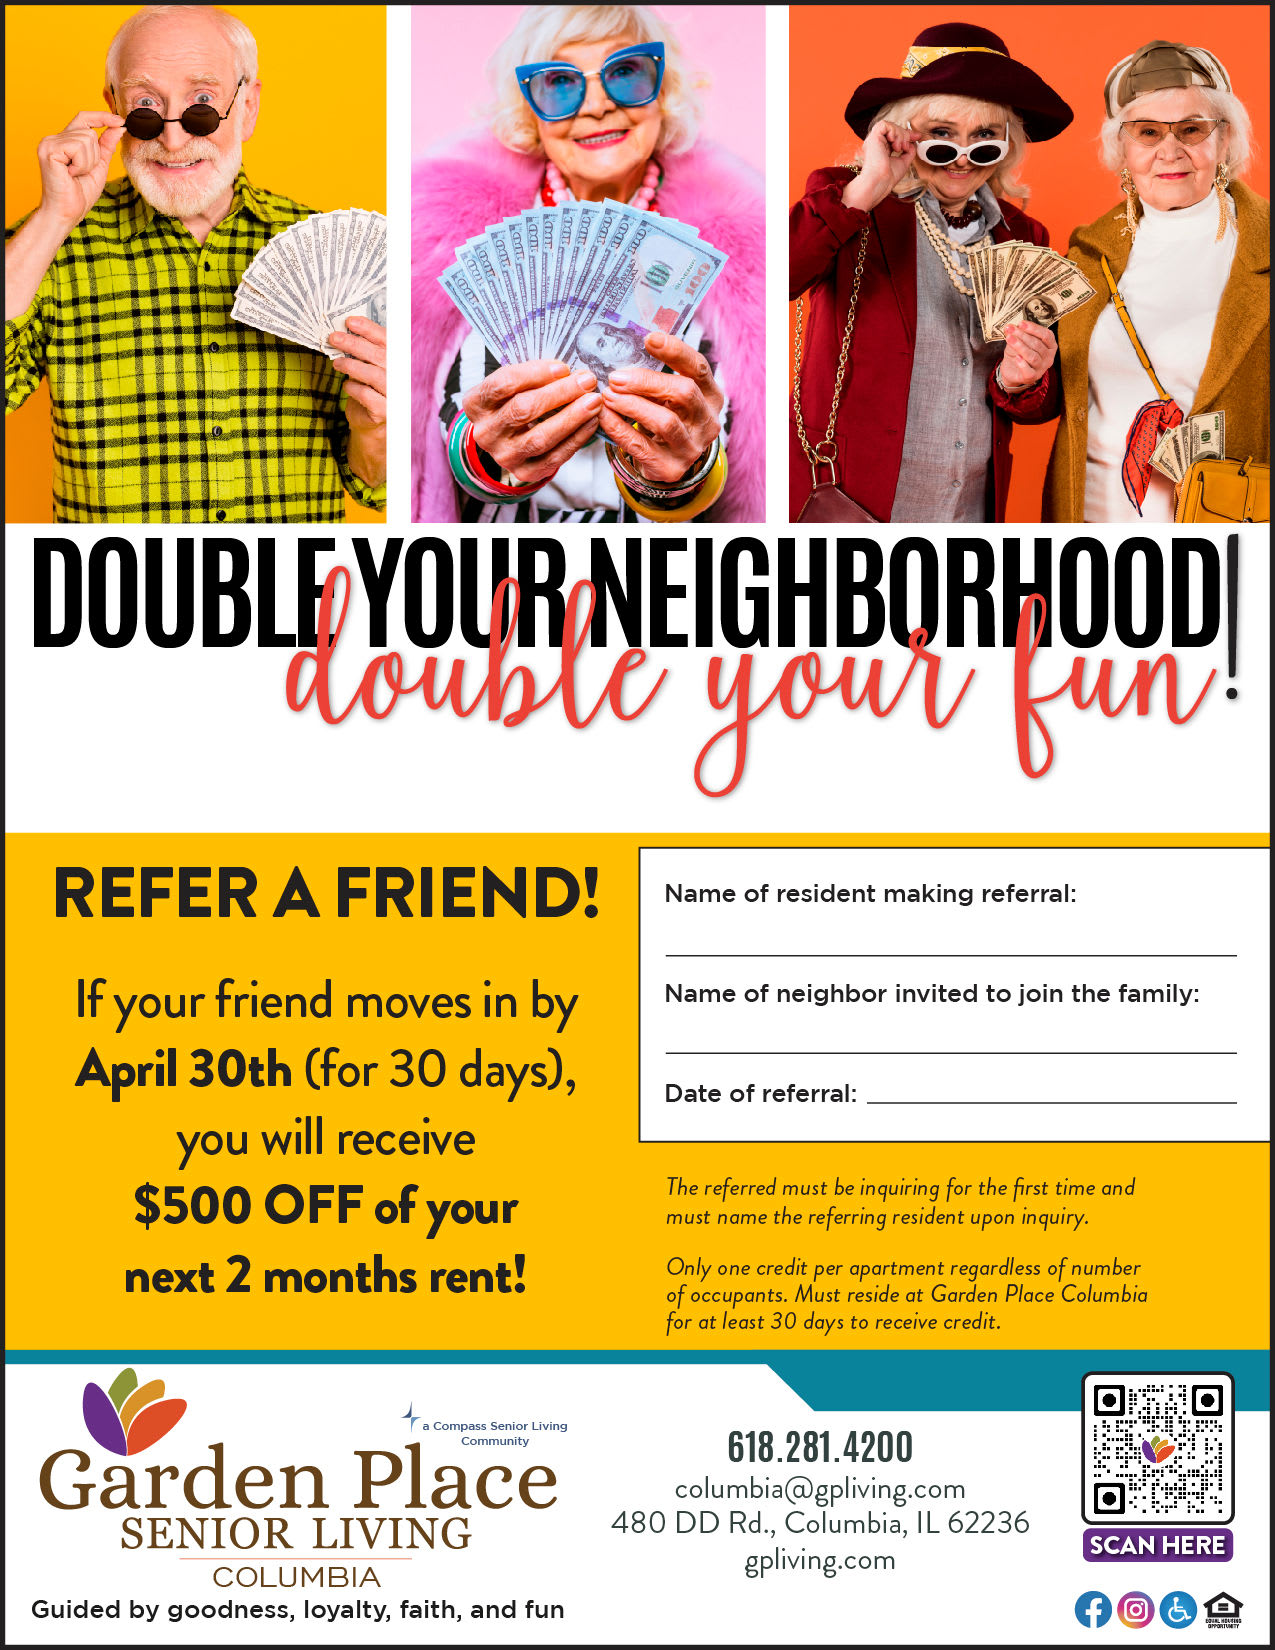 Double your Neighborhood flyer at Garden Place Columbia in Columbia, Illinois